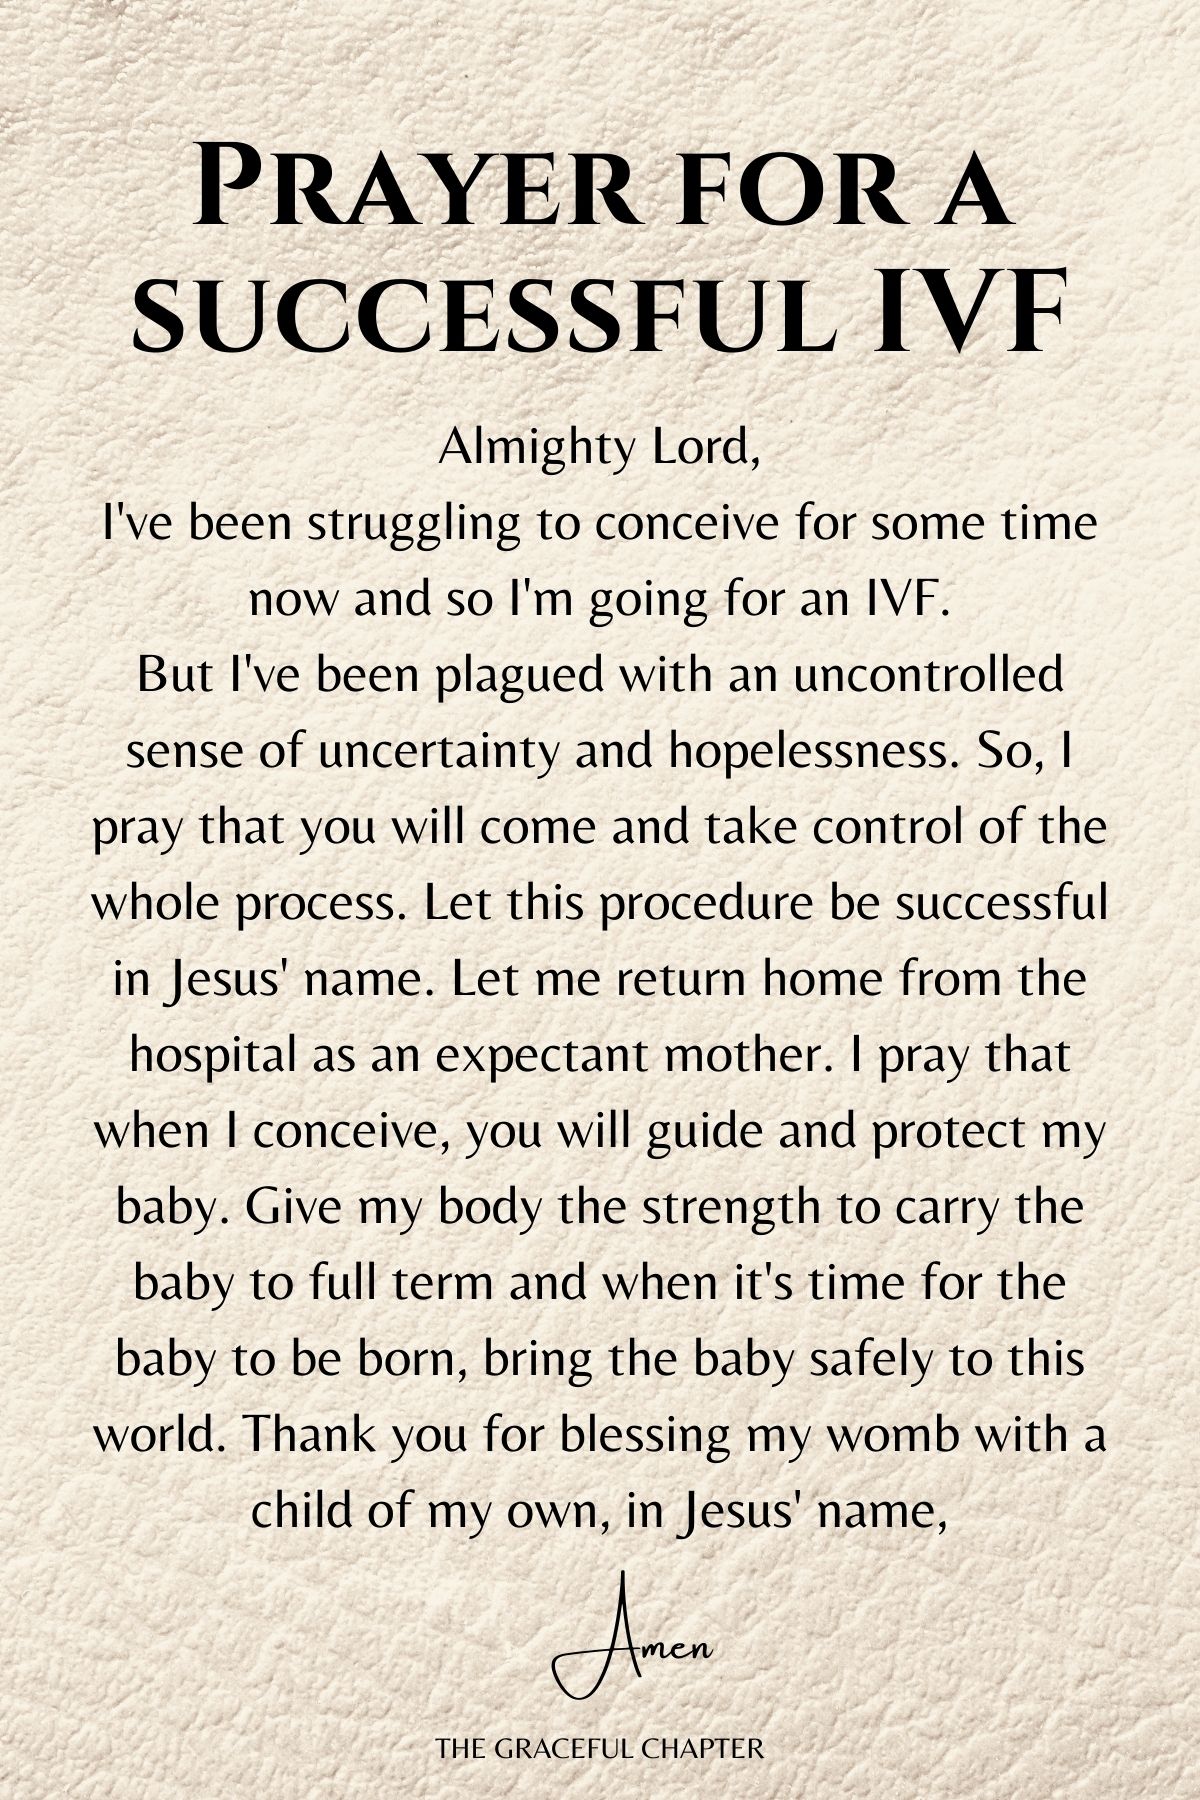 Prayer for a successful IVF